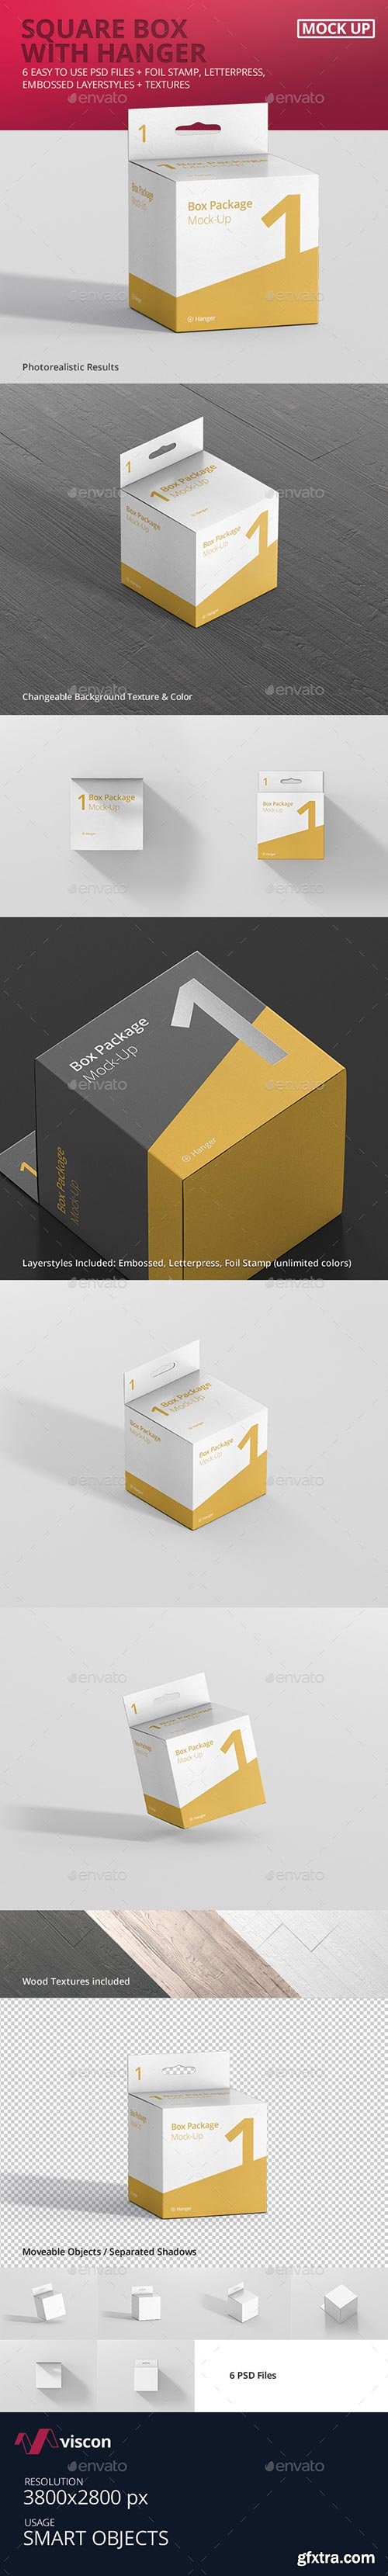 Graphicriver - Package Box Mock-Up - Square with Hanger 17932192